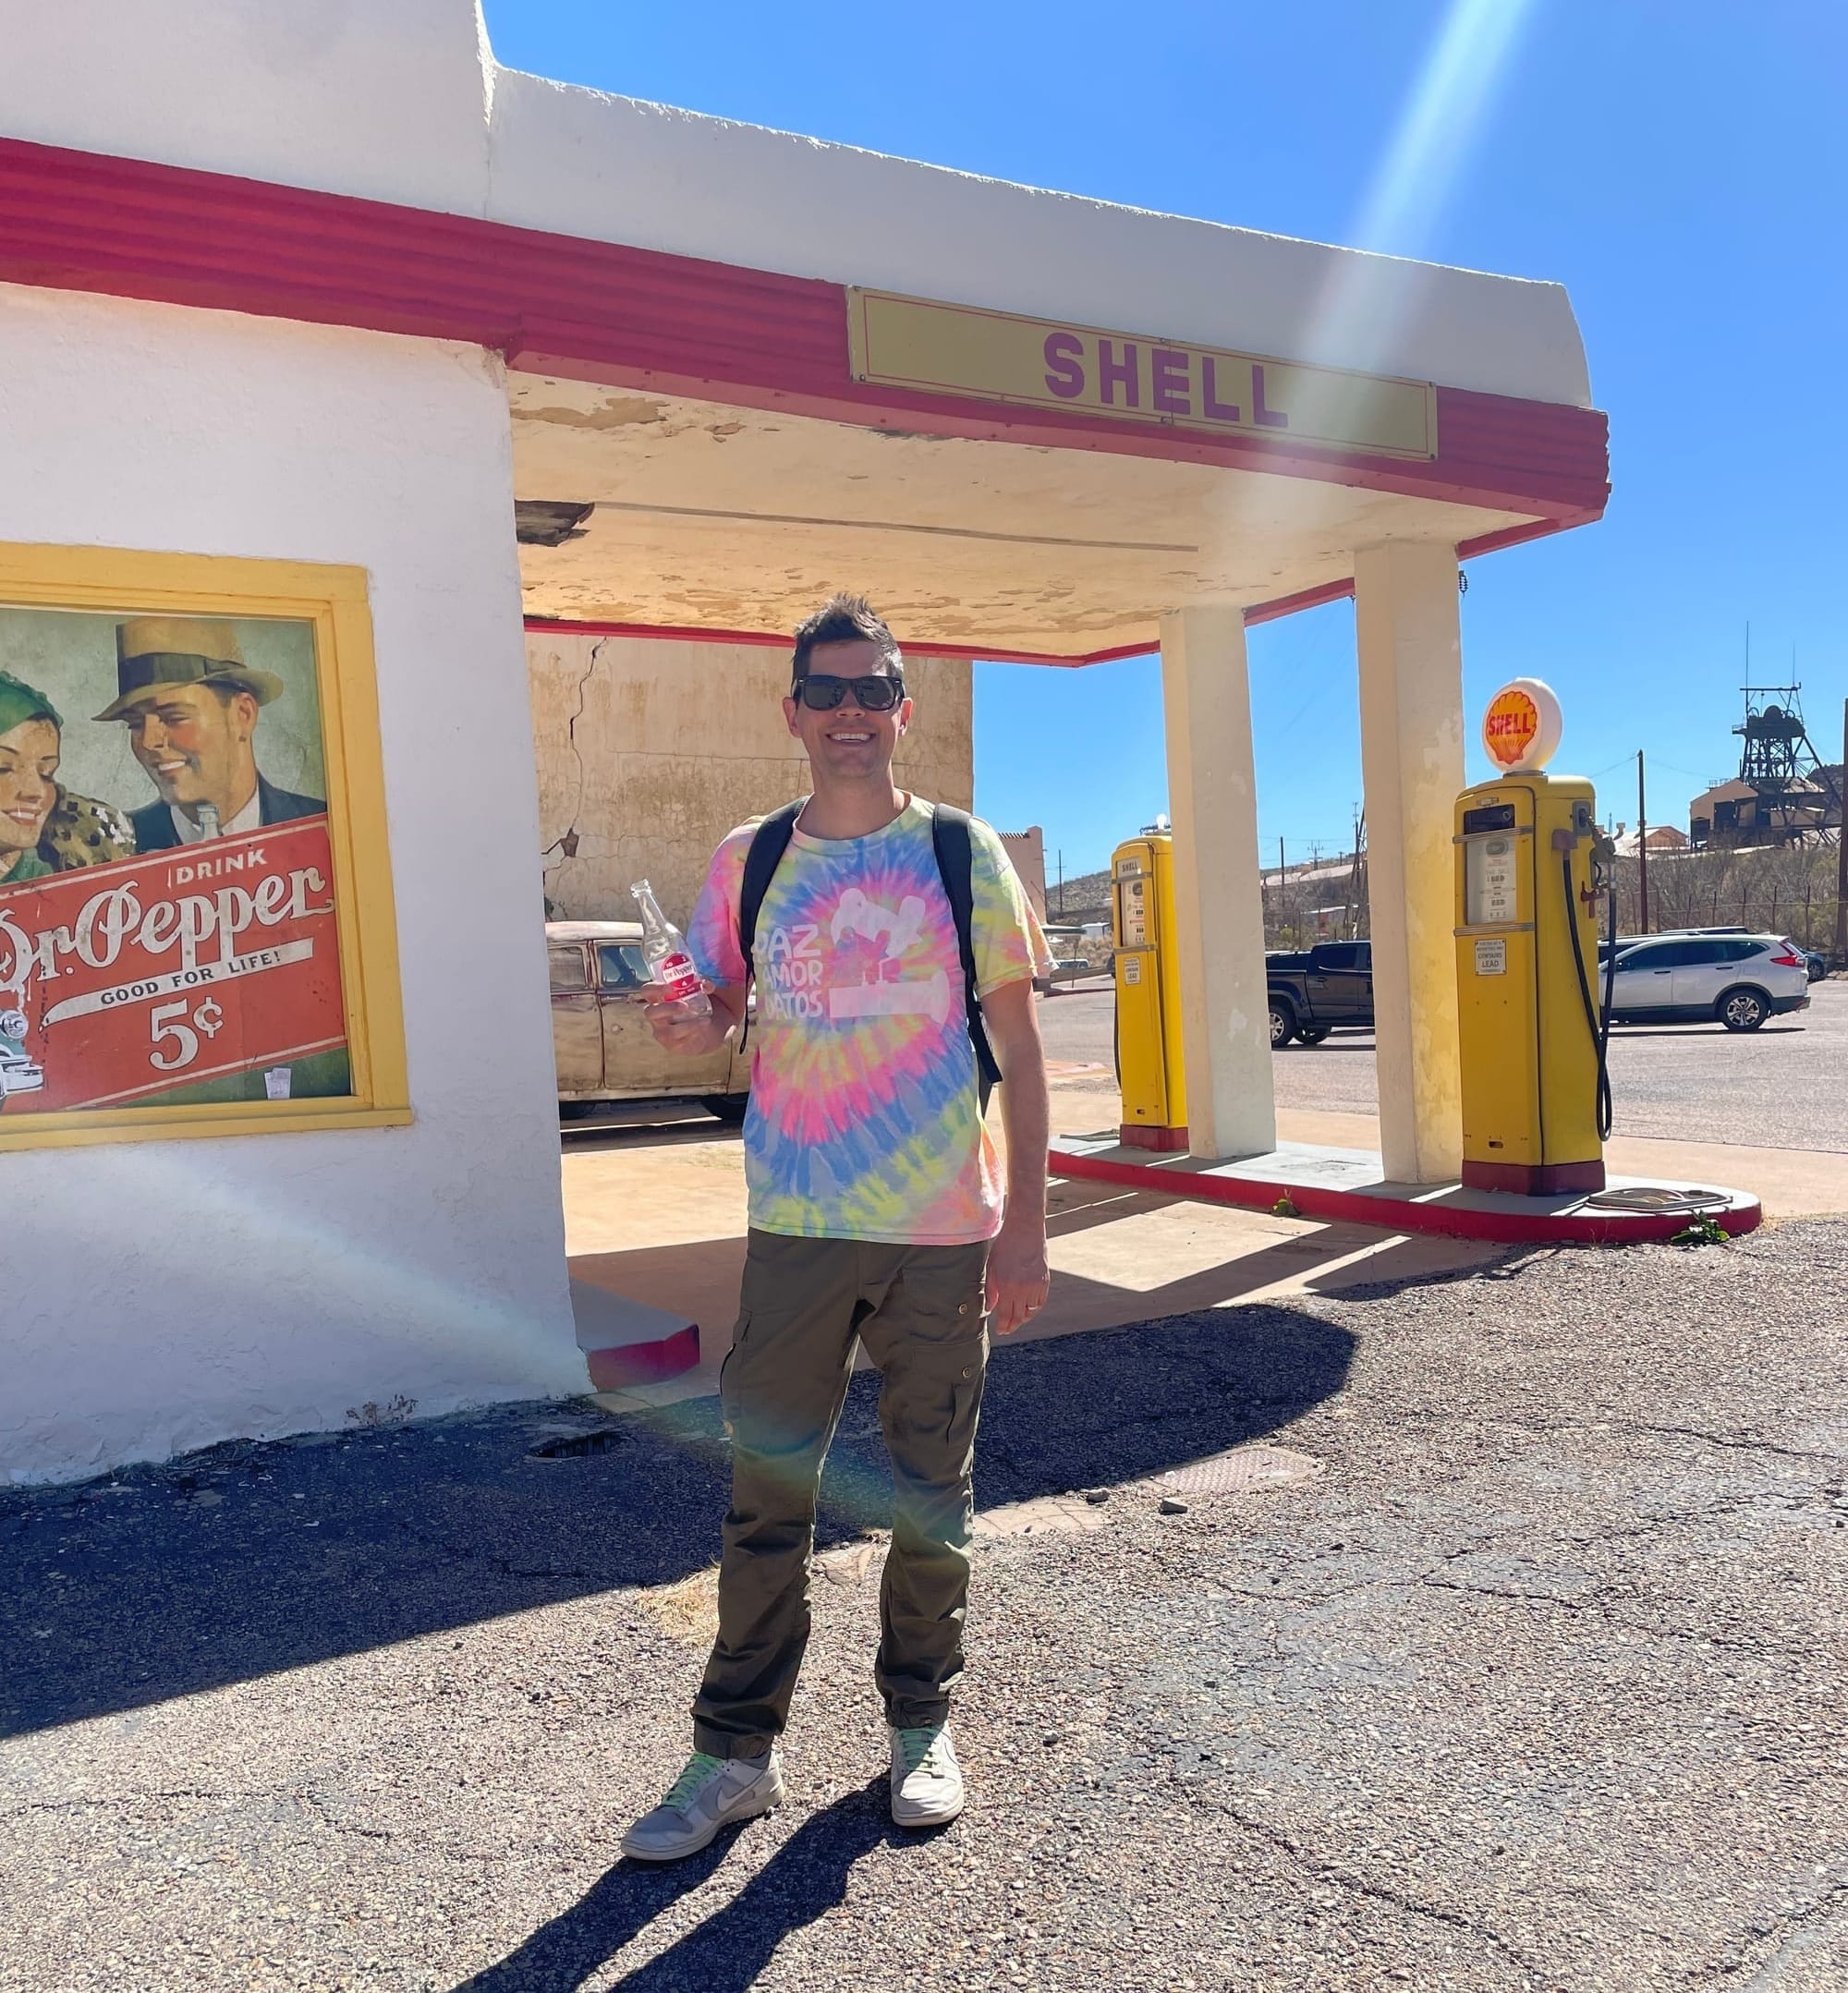 Touring Small Towns in Arizona